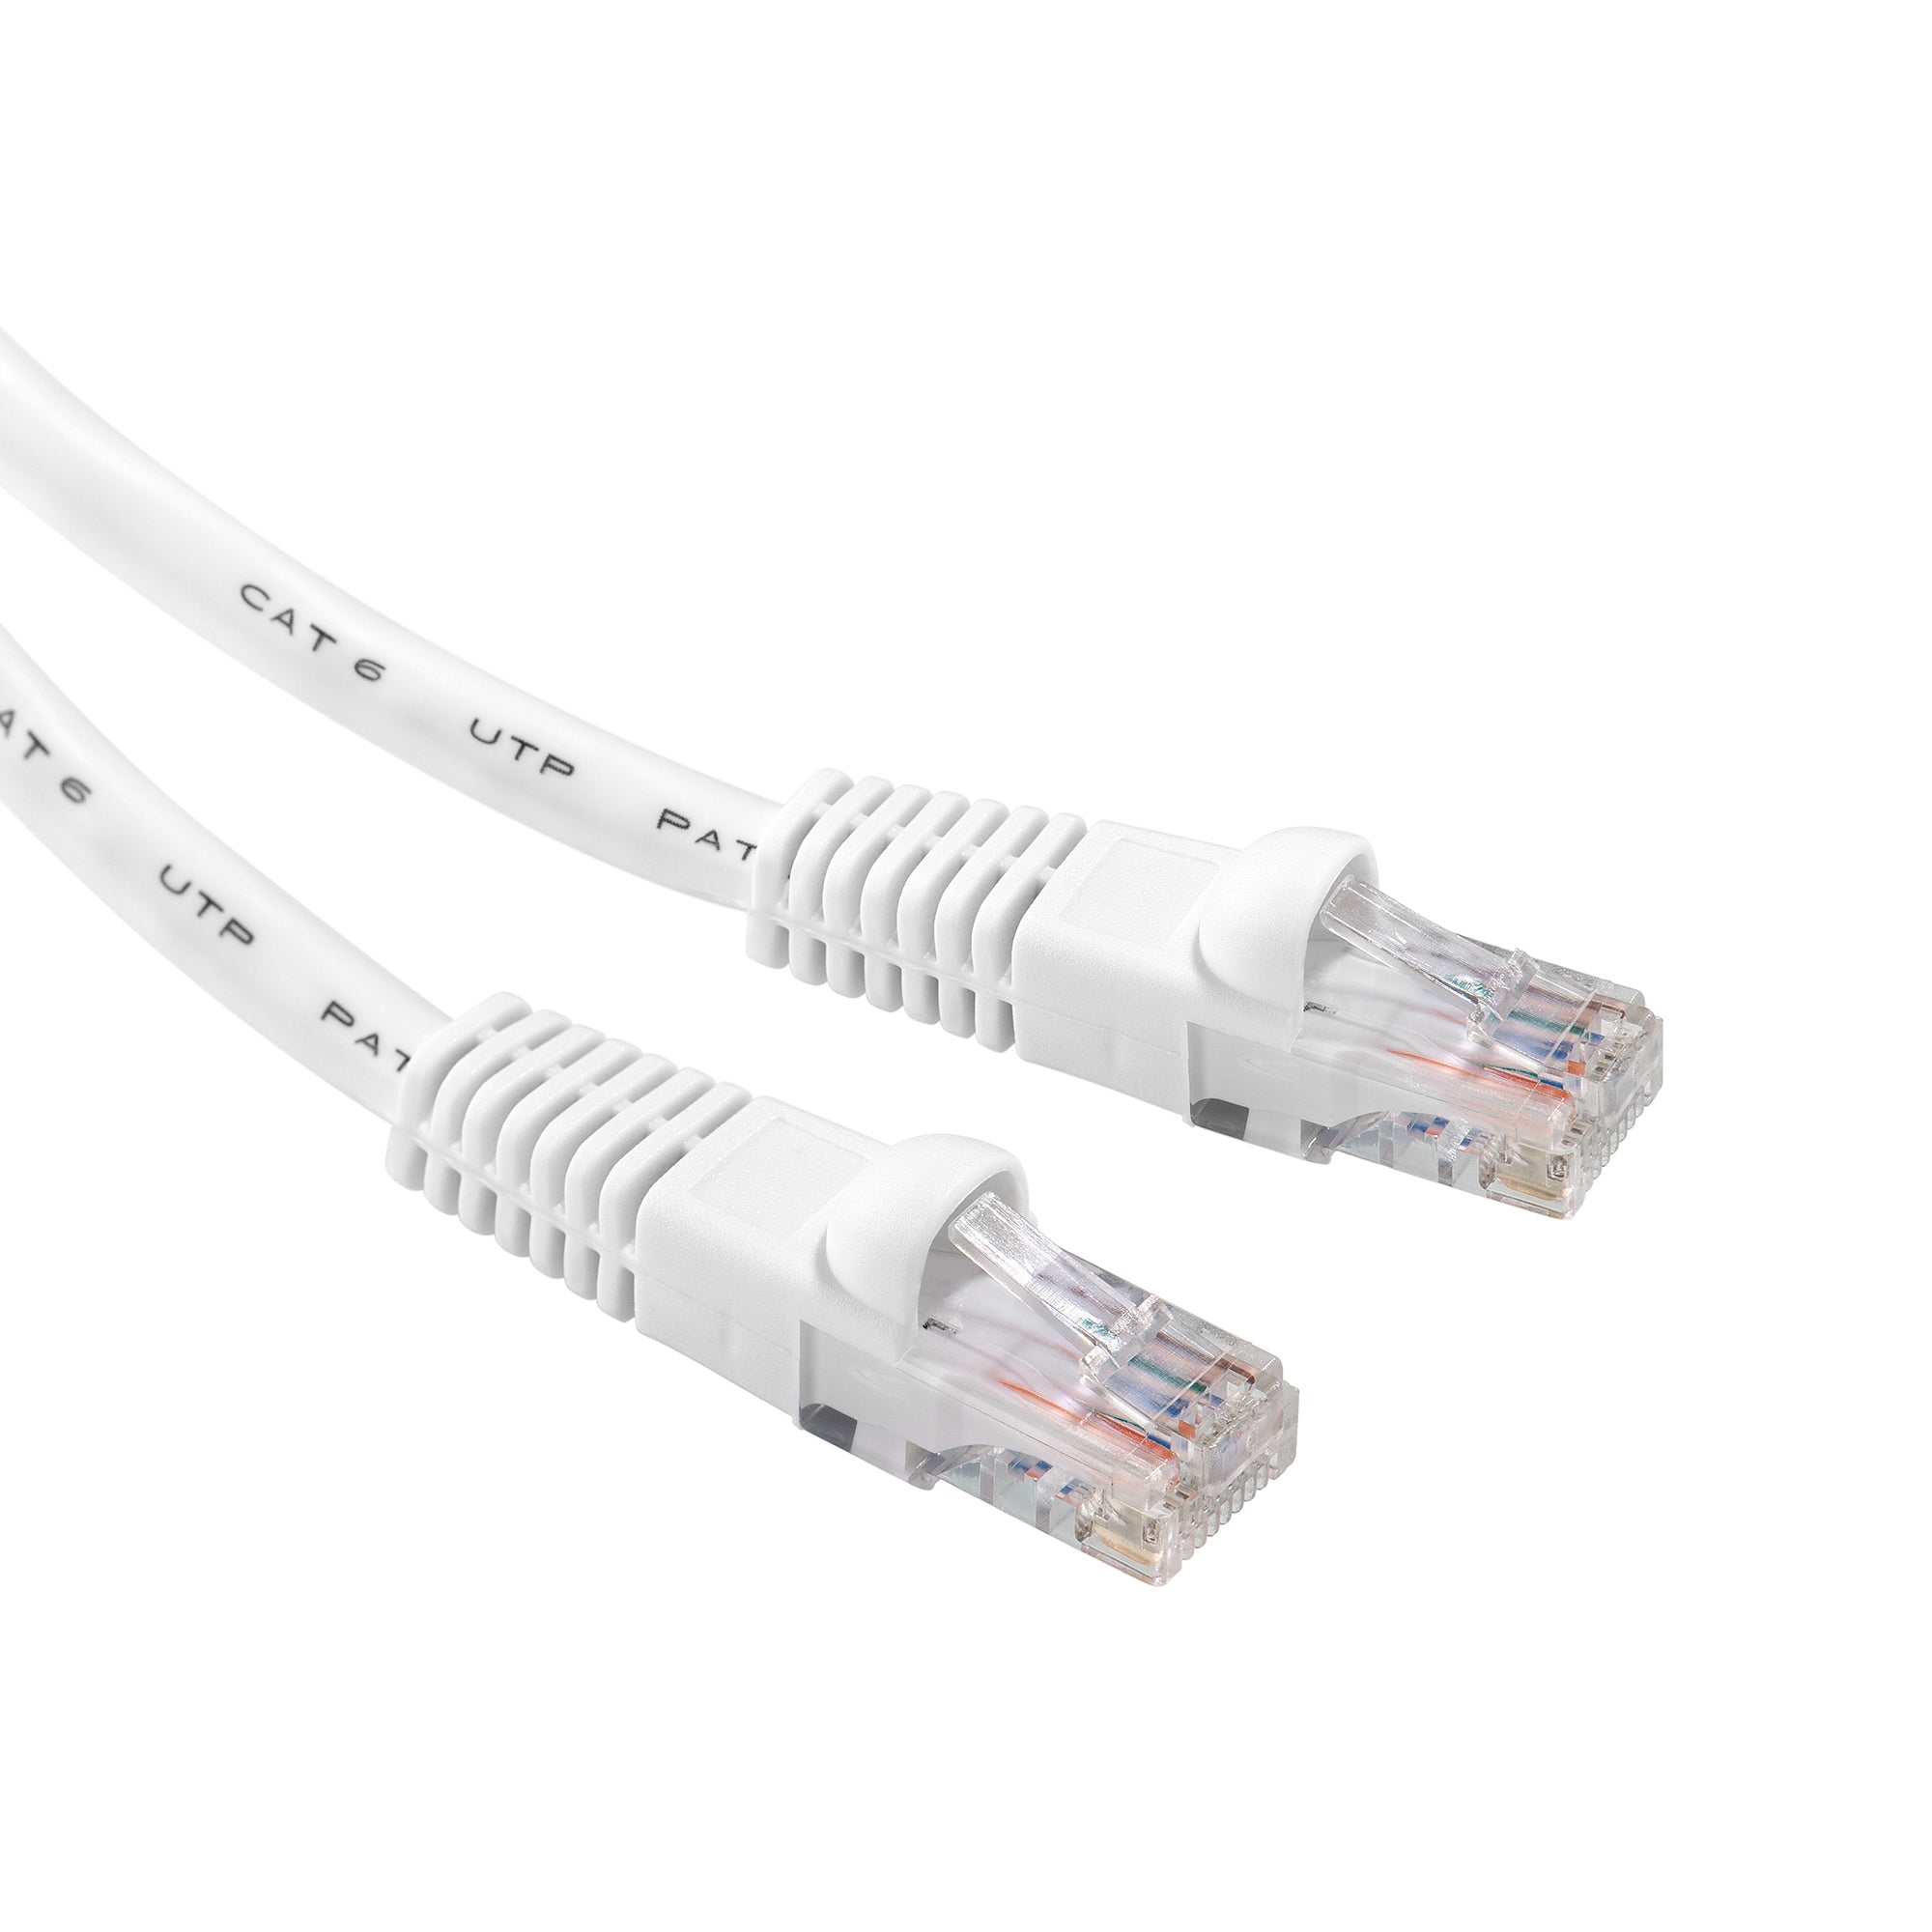 PAC LAN Cable 3 m CAT6 Cable 3 meter Ethernet Lan Network CAT 6